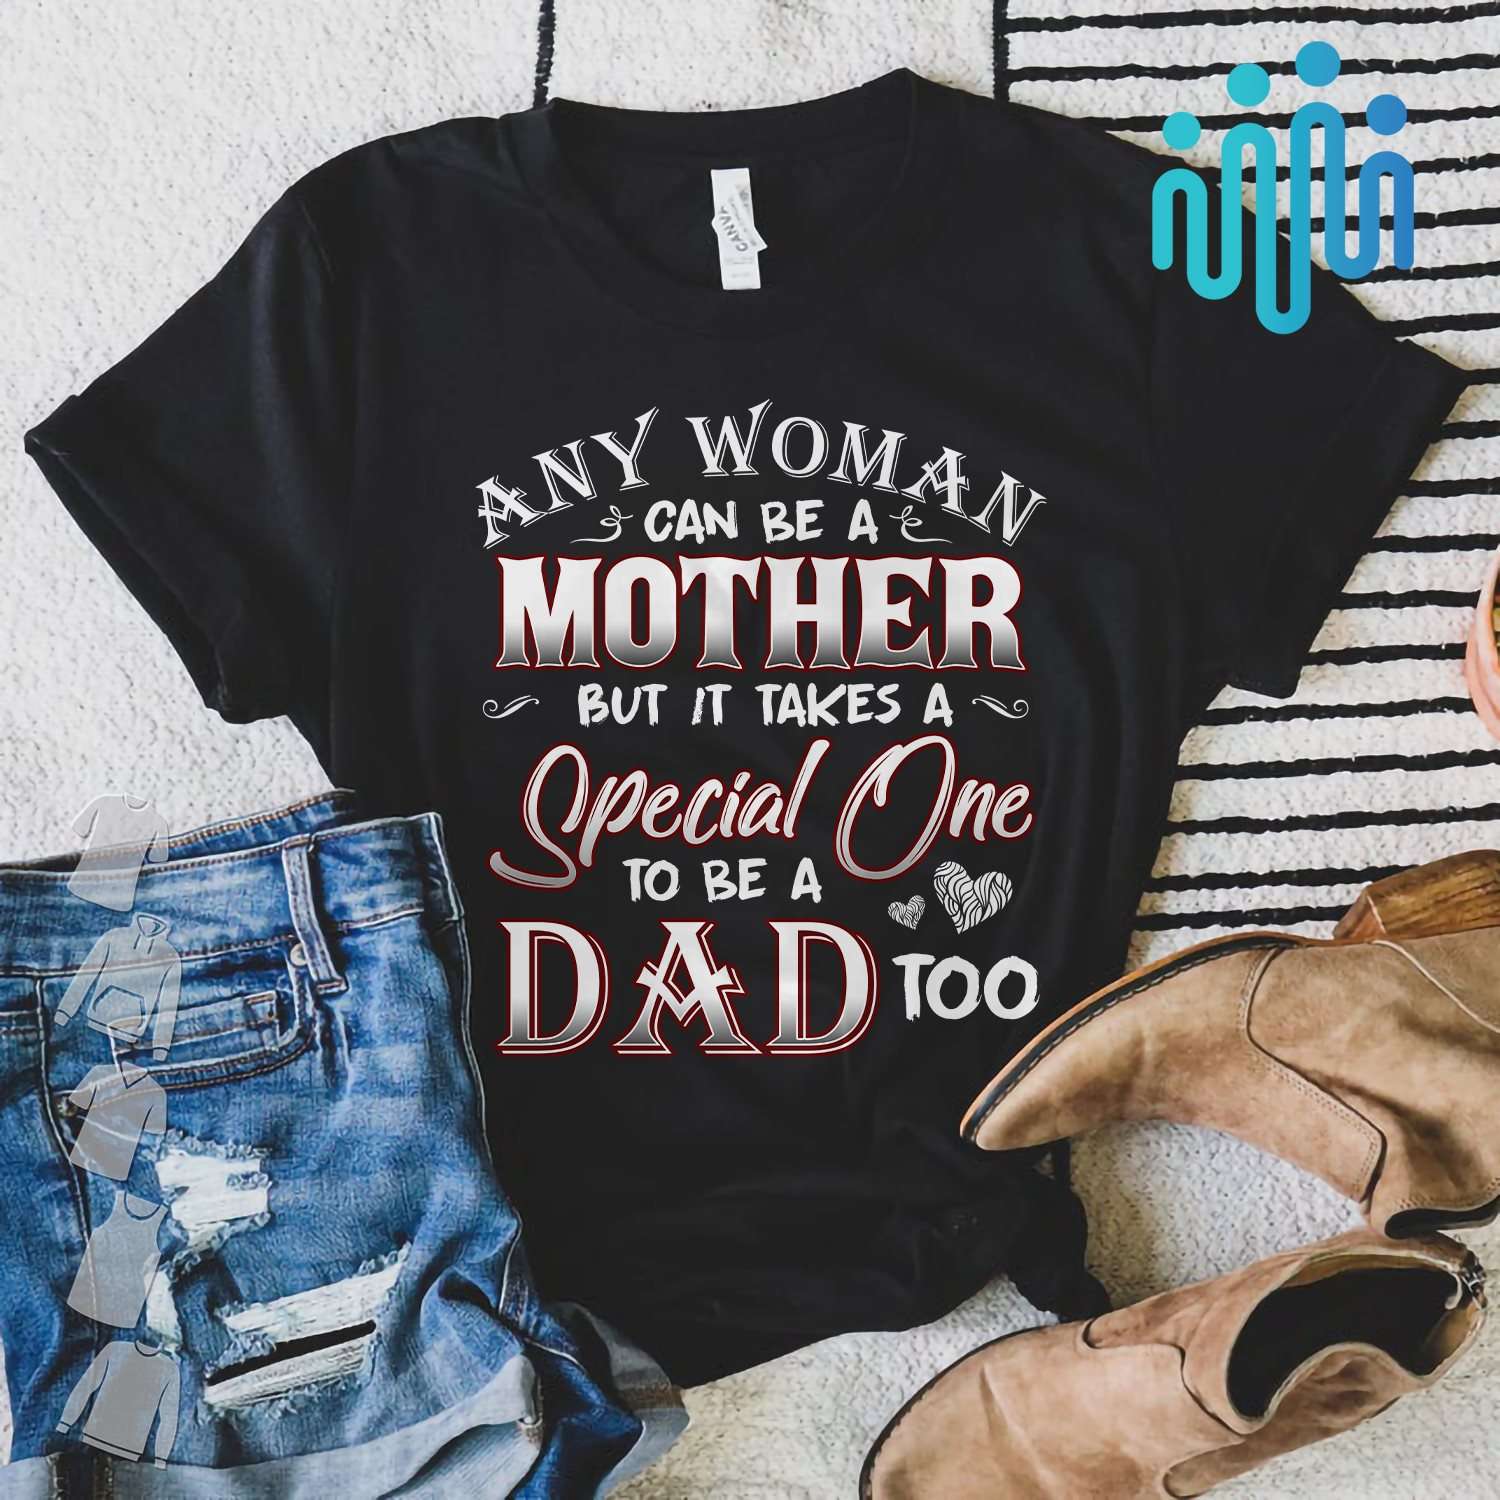 Any woman can be a mother but it takes a special one to be a dad too - Single mom T-shirt, mother's day gift